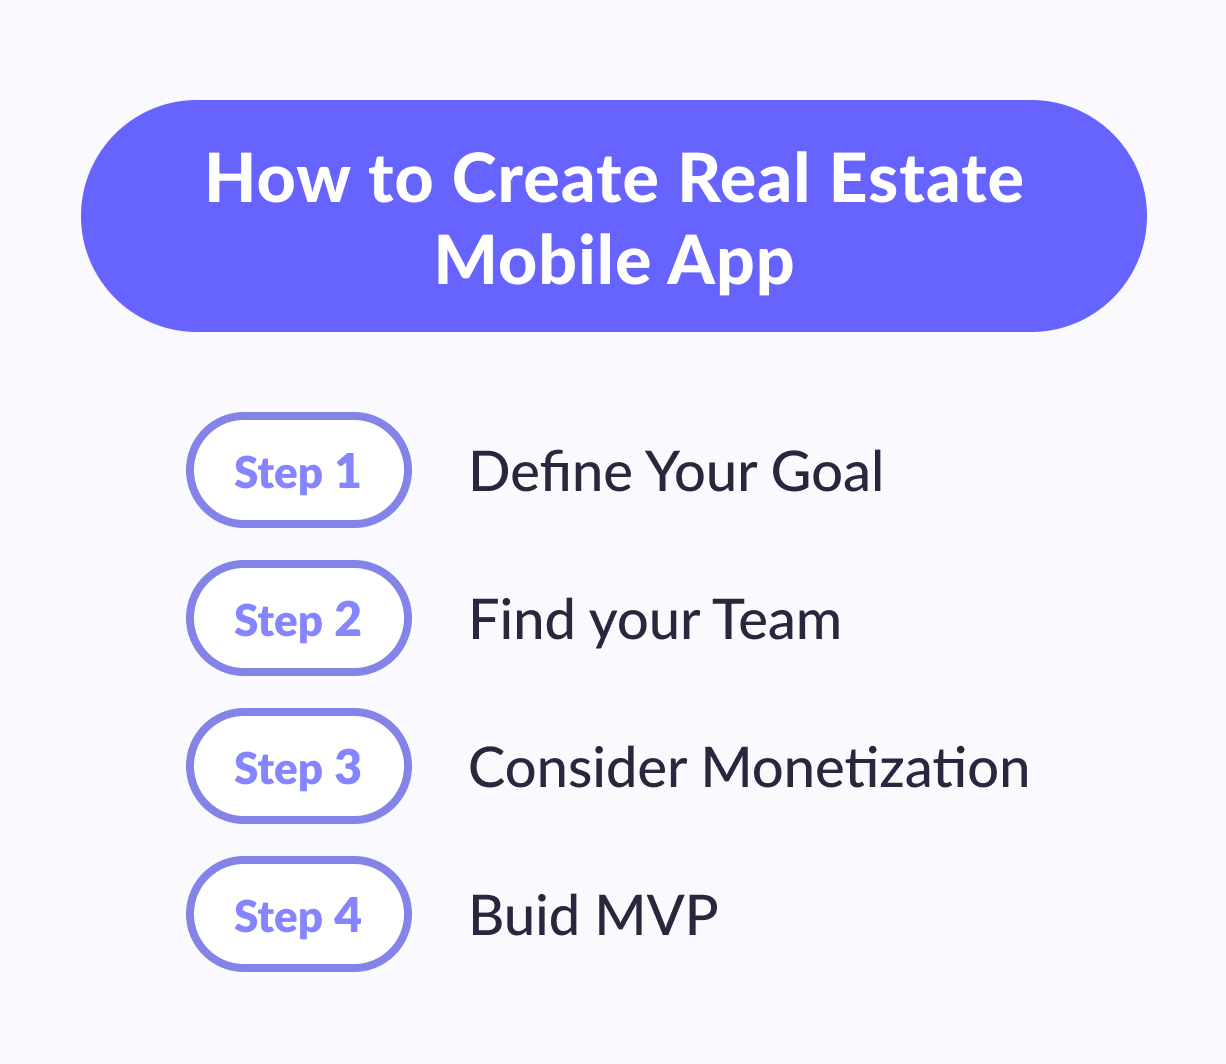 How to create real estate mobile app